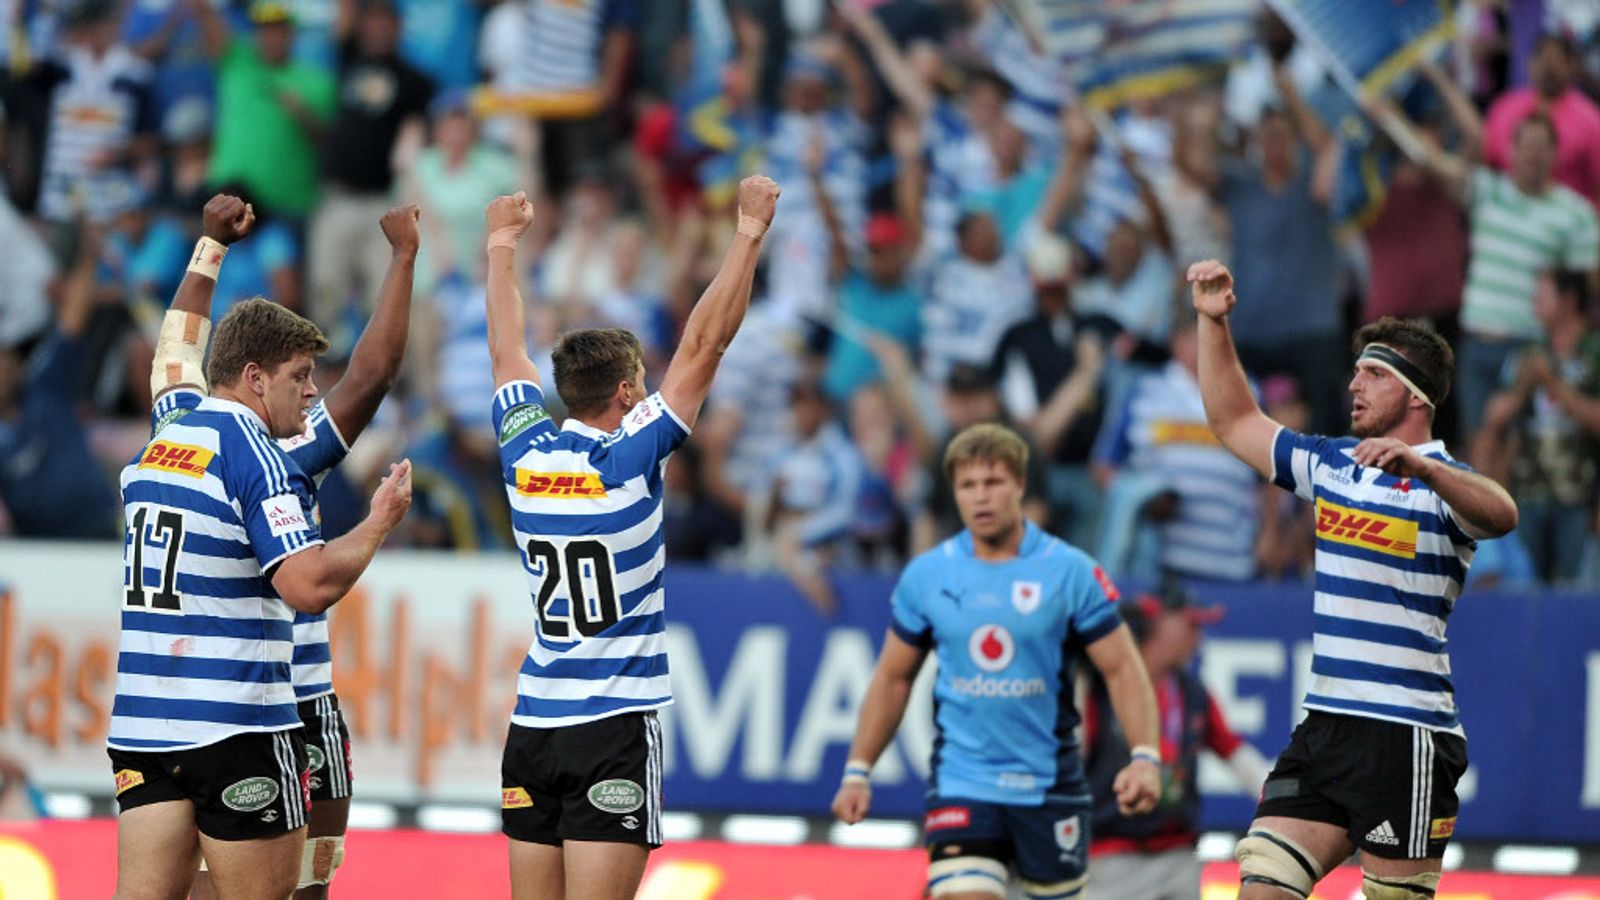 The ITM Cup and Currie Cup finals live on Sky Sports this weekend